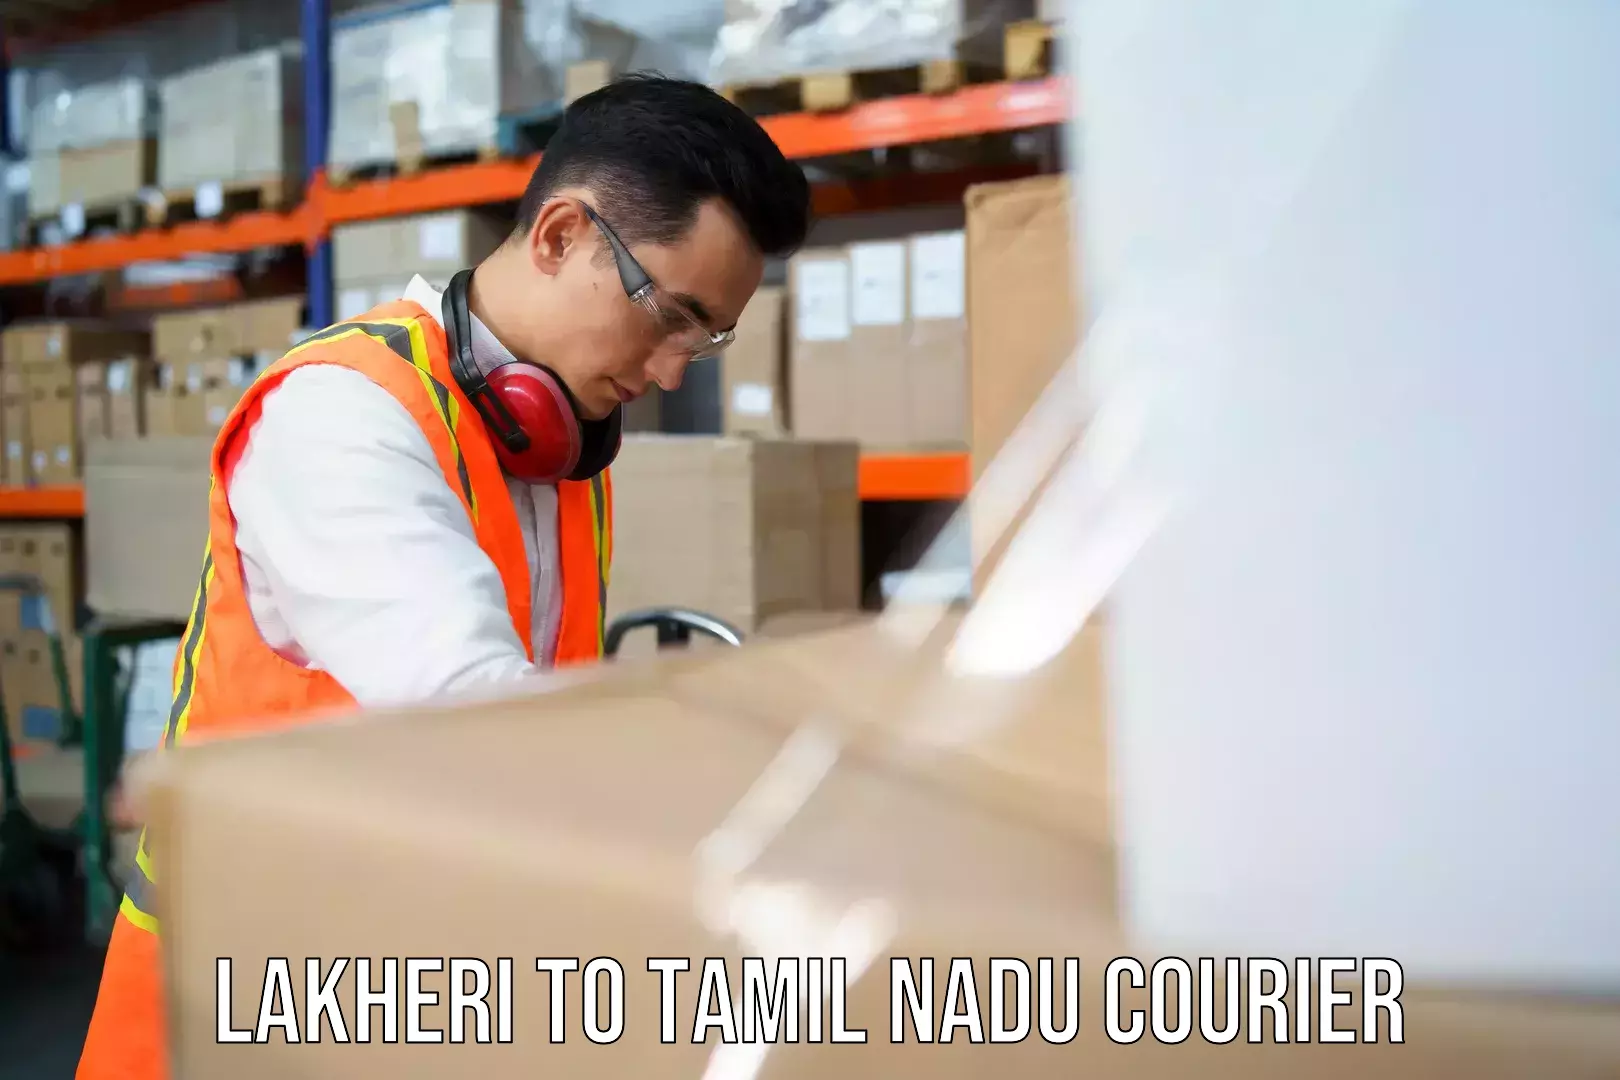 Easy access courier services Lakheri to Ambattur